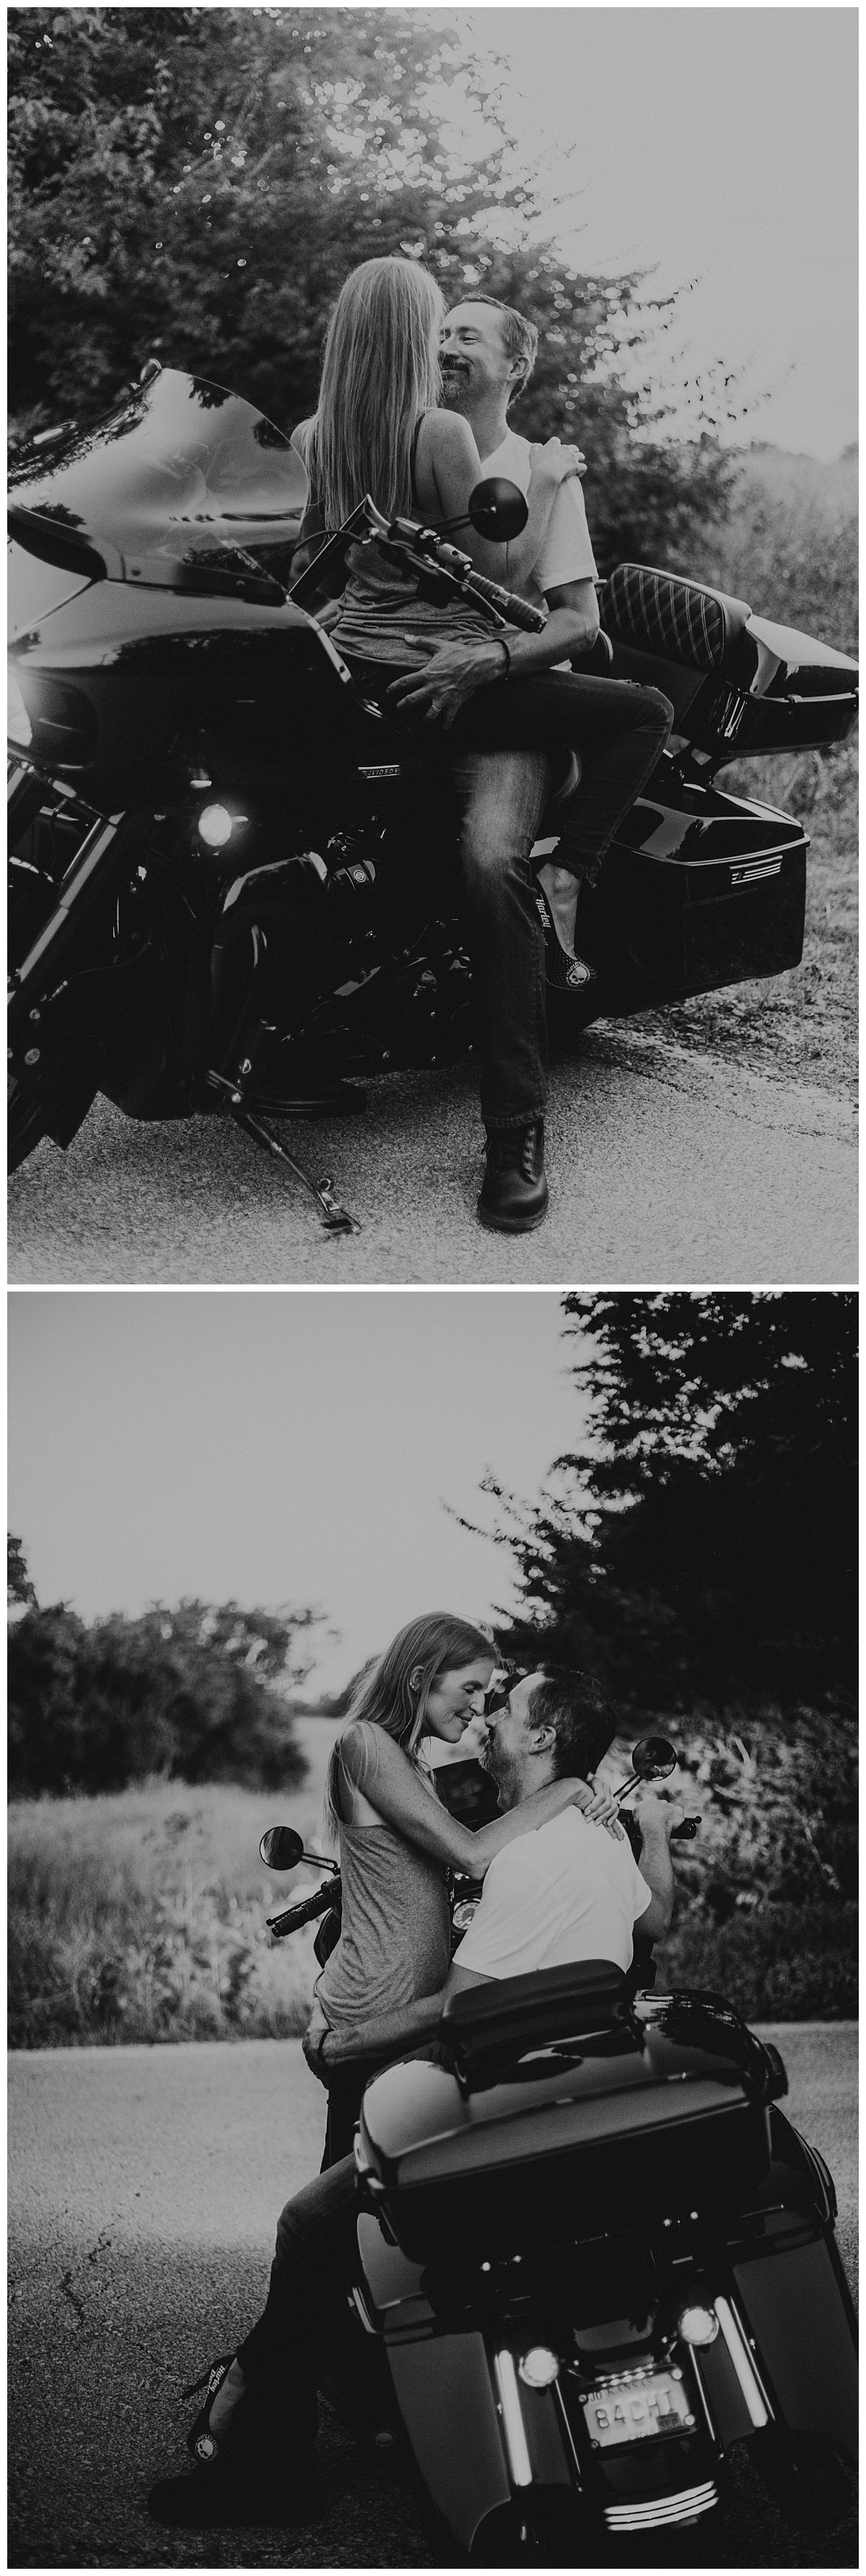 motorcycle+session+_+adventure+session+_+engagement+session+_+motorcycle+photos+_+lana+del+rey+_+ride+or+die+_+adventurous+couple+_+kansas+city+photographer+_+kansas+city+photography (15).jpeg